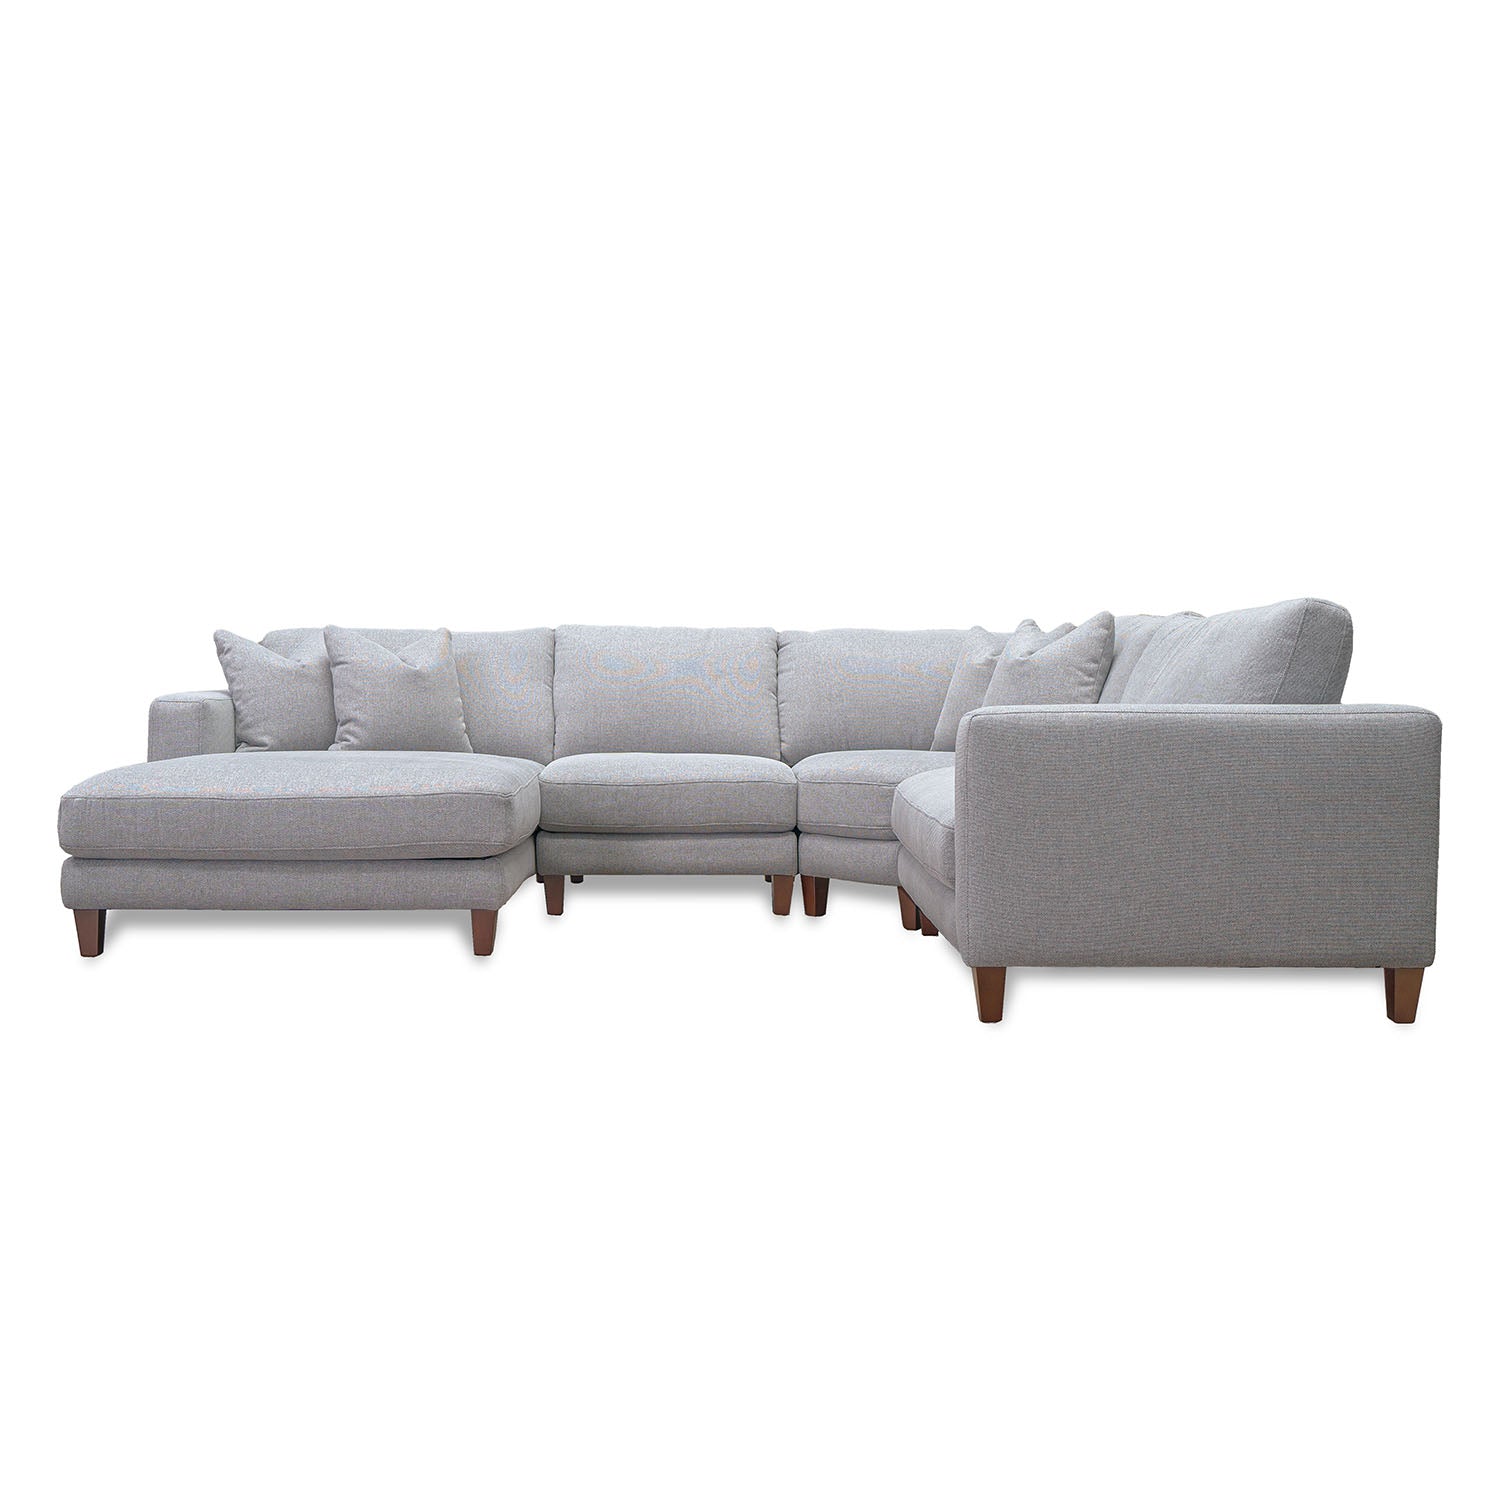 Chelsea Deep 2.5 Seat + 1.5 Armless + Large Corner + Chaise LSF